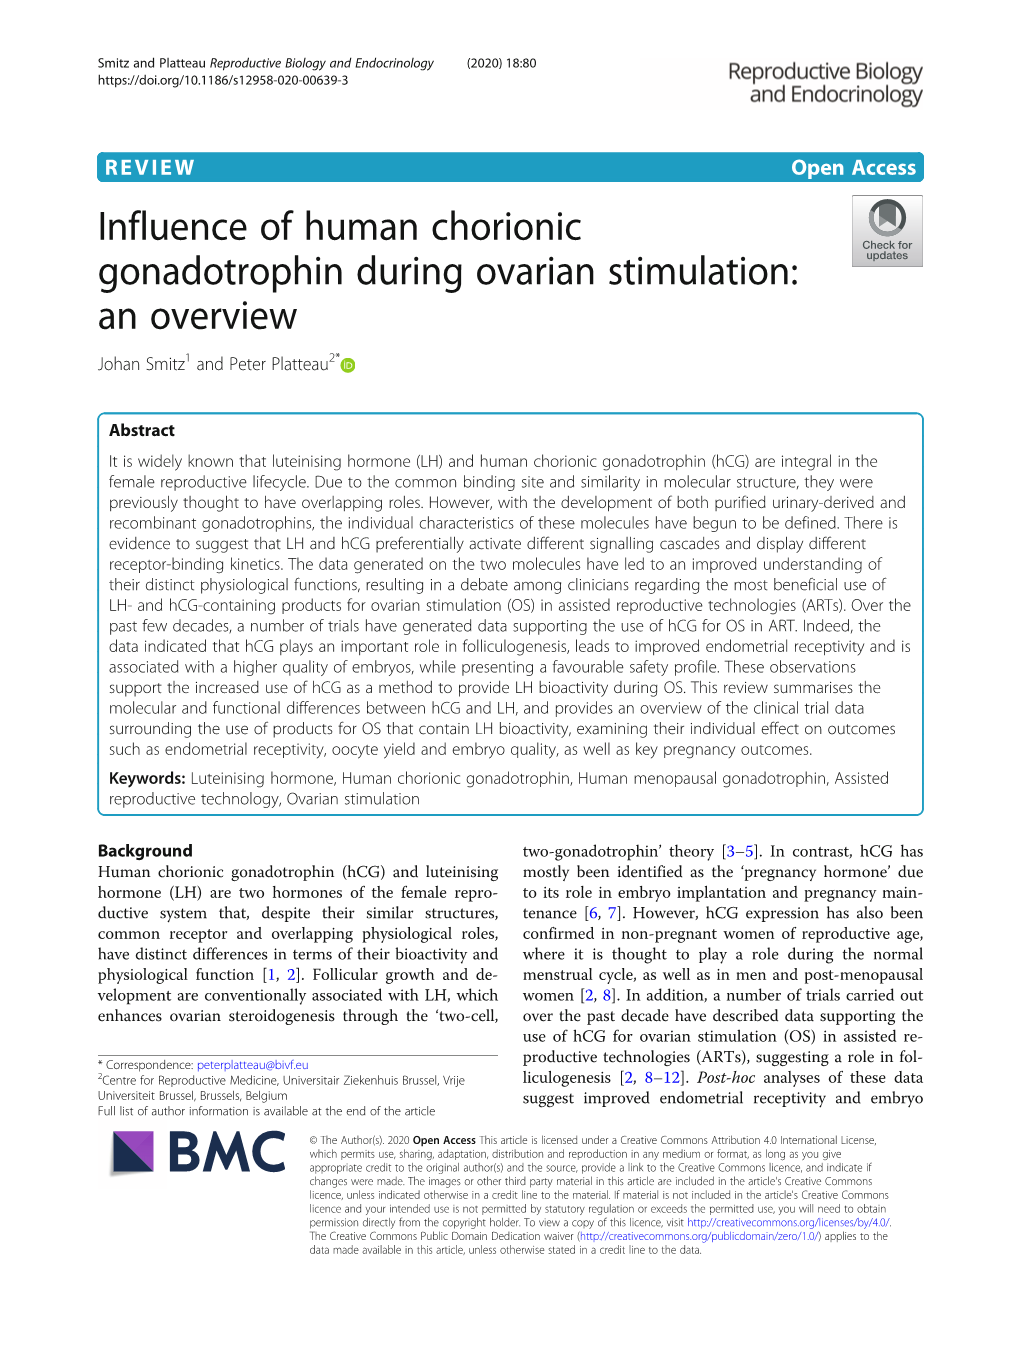 Influence of Human Chorionic Gonadotrophin During Ovarian Stimulation: an Overview Johan Smitz1 and Peter Platteau2*